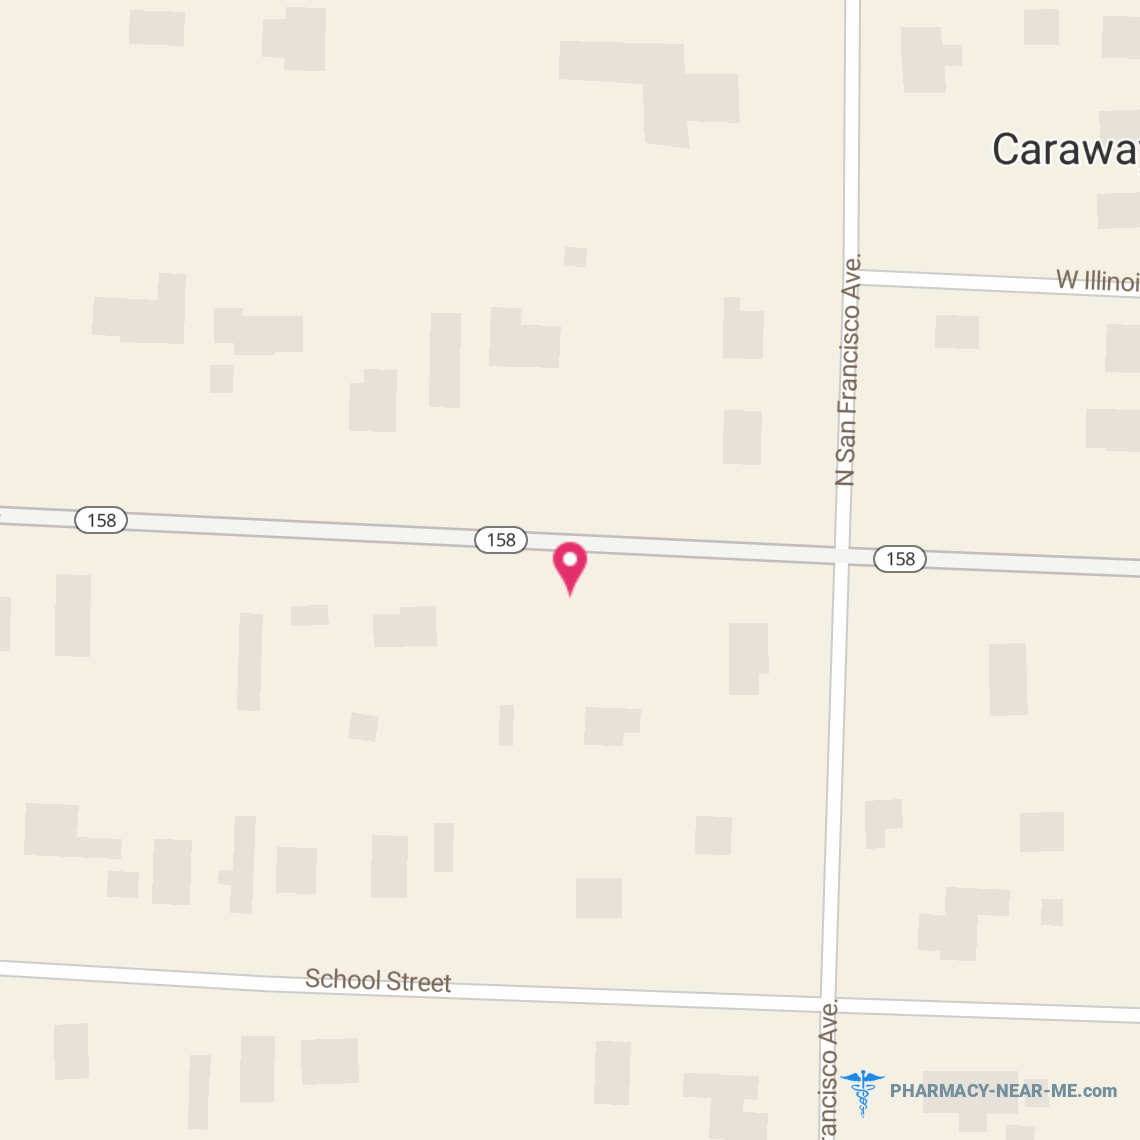 CARAWAY DRUG - Pharmacy Hours, Phone, Reviews & Information: 106 W State St, Caraway, Arkansas 72419, United States